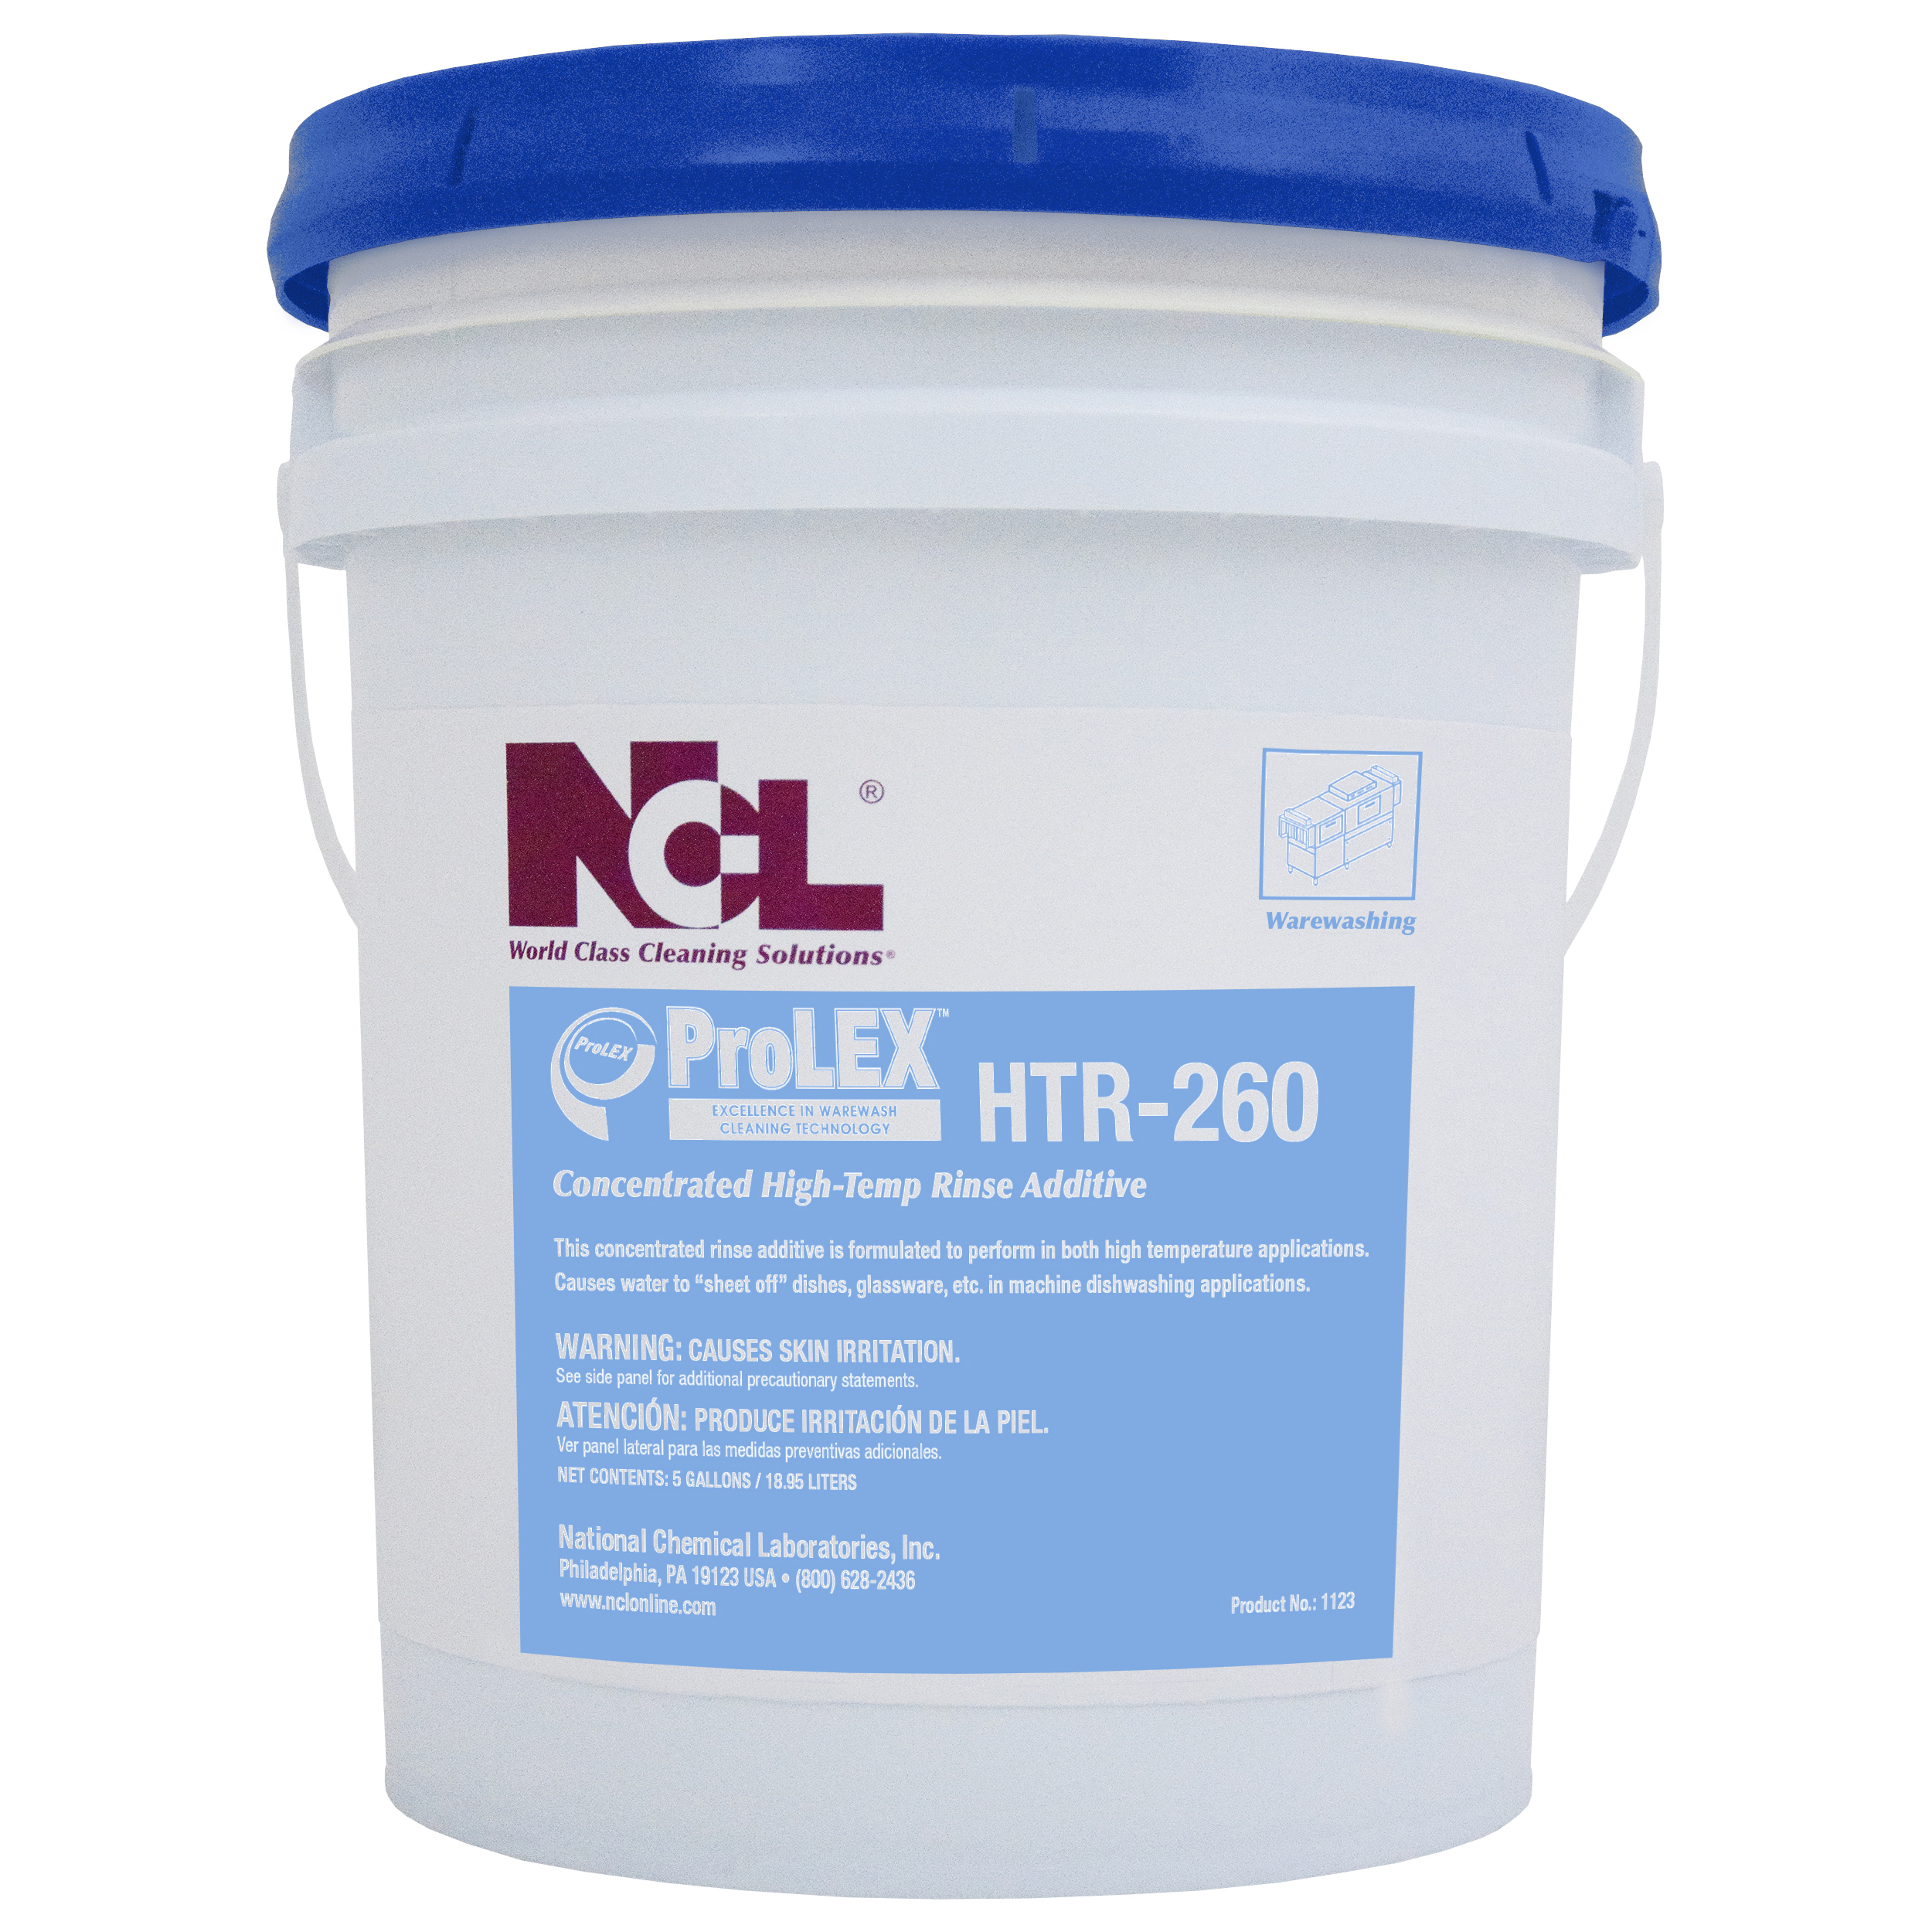  ProLEX HTR-260 Concentrated High Temp Rinse Additive 5 Gal. Pail (NCL1123-21) 